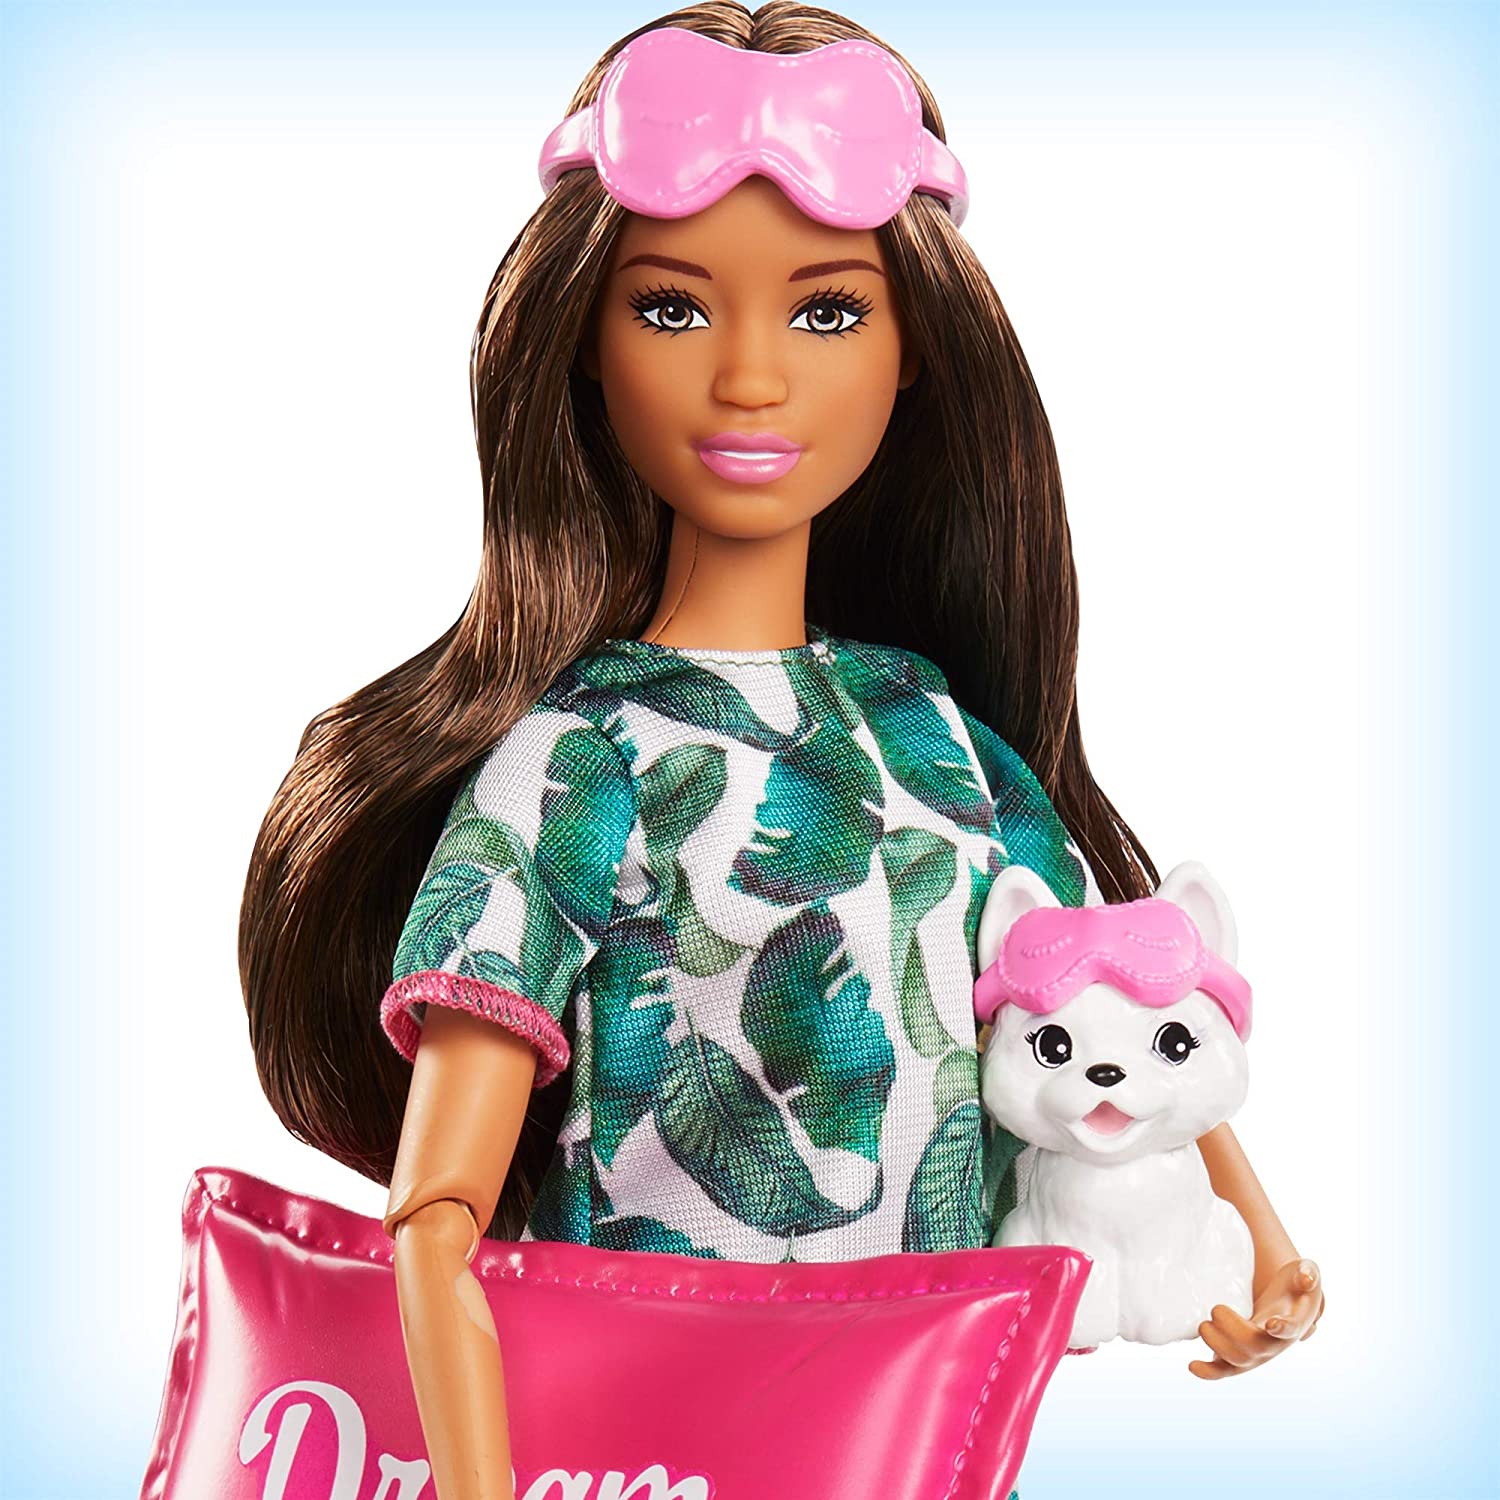 Barbie Relaxation Doll with Puppy and 8 Accessories